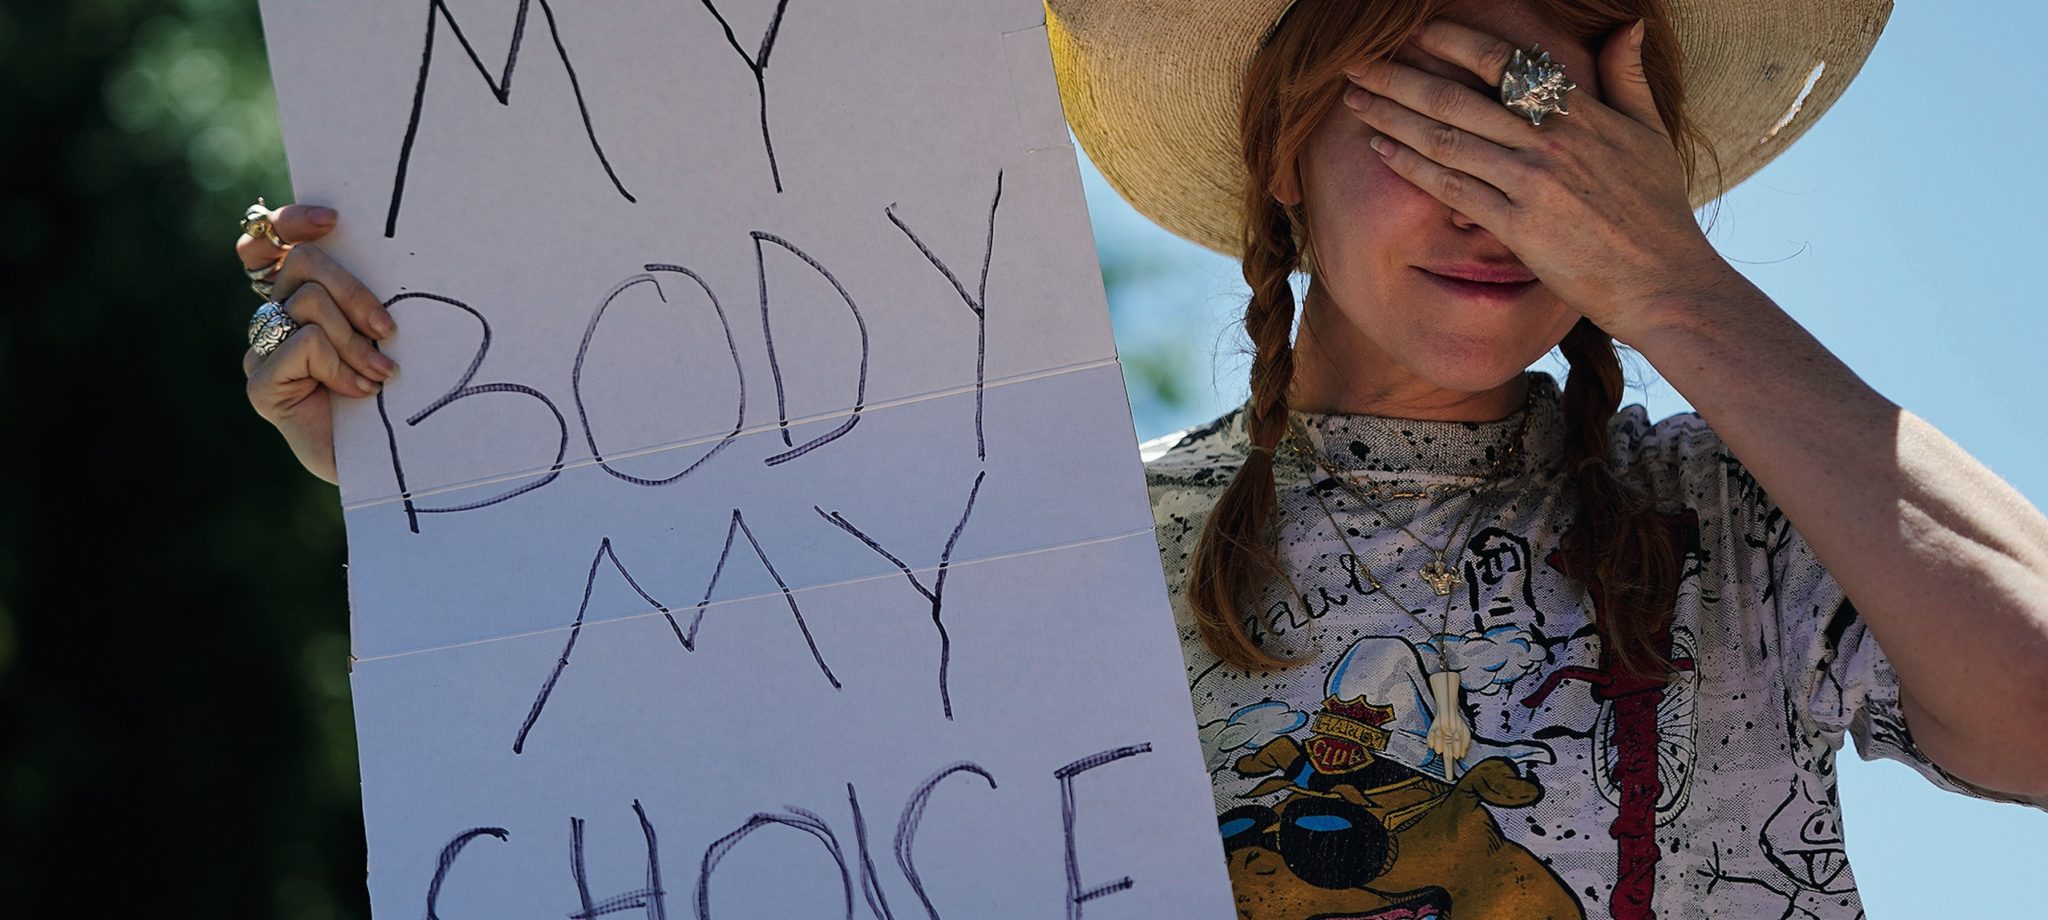 Emotional woman carrying "My body my choice" sign